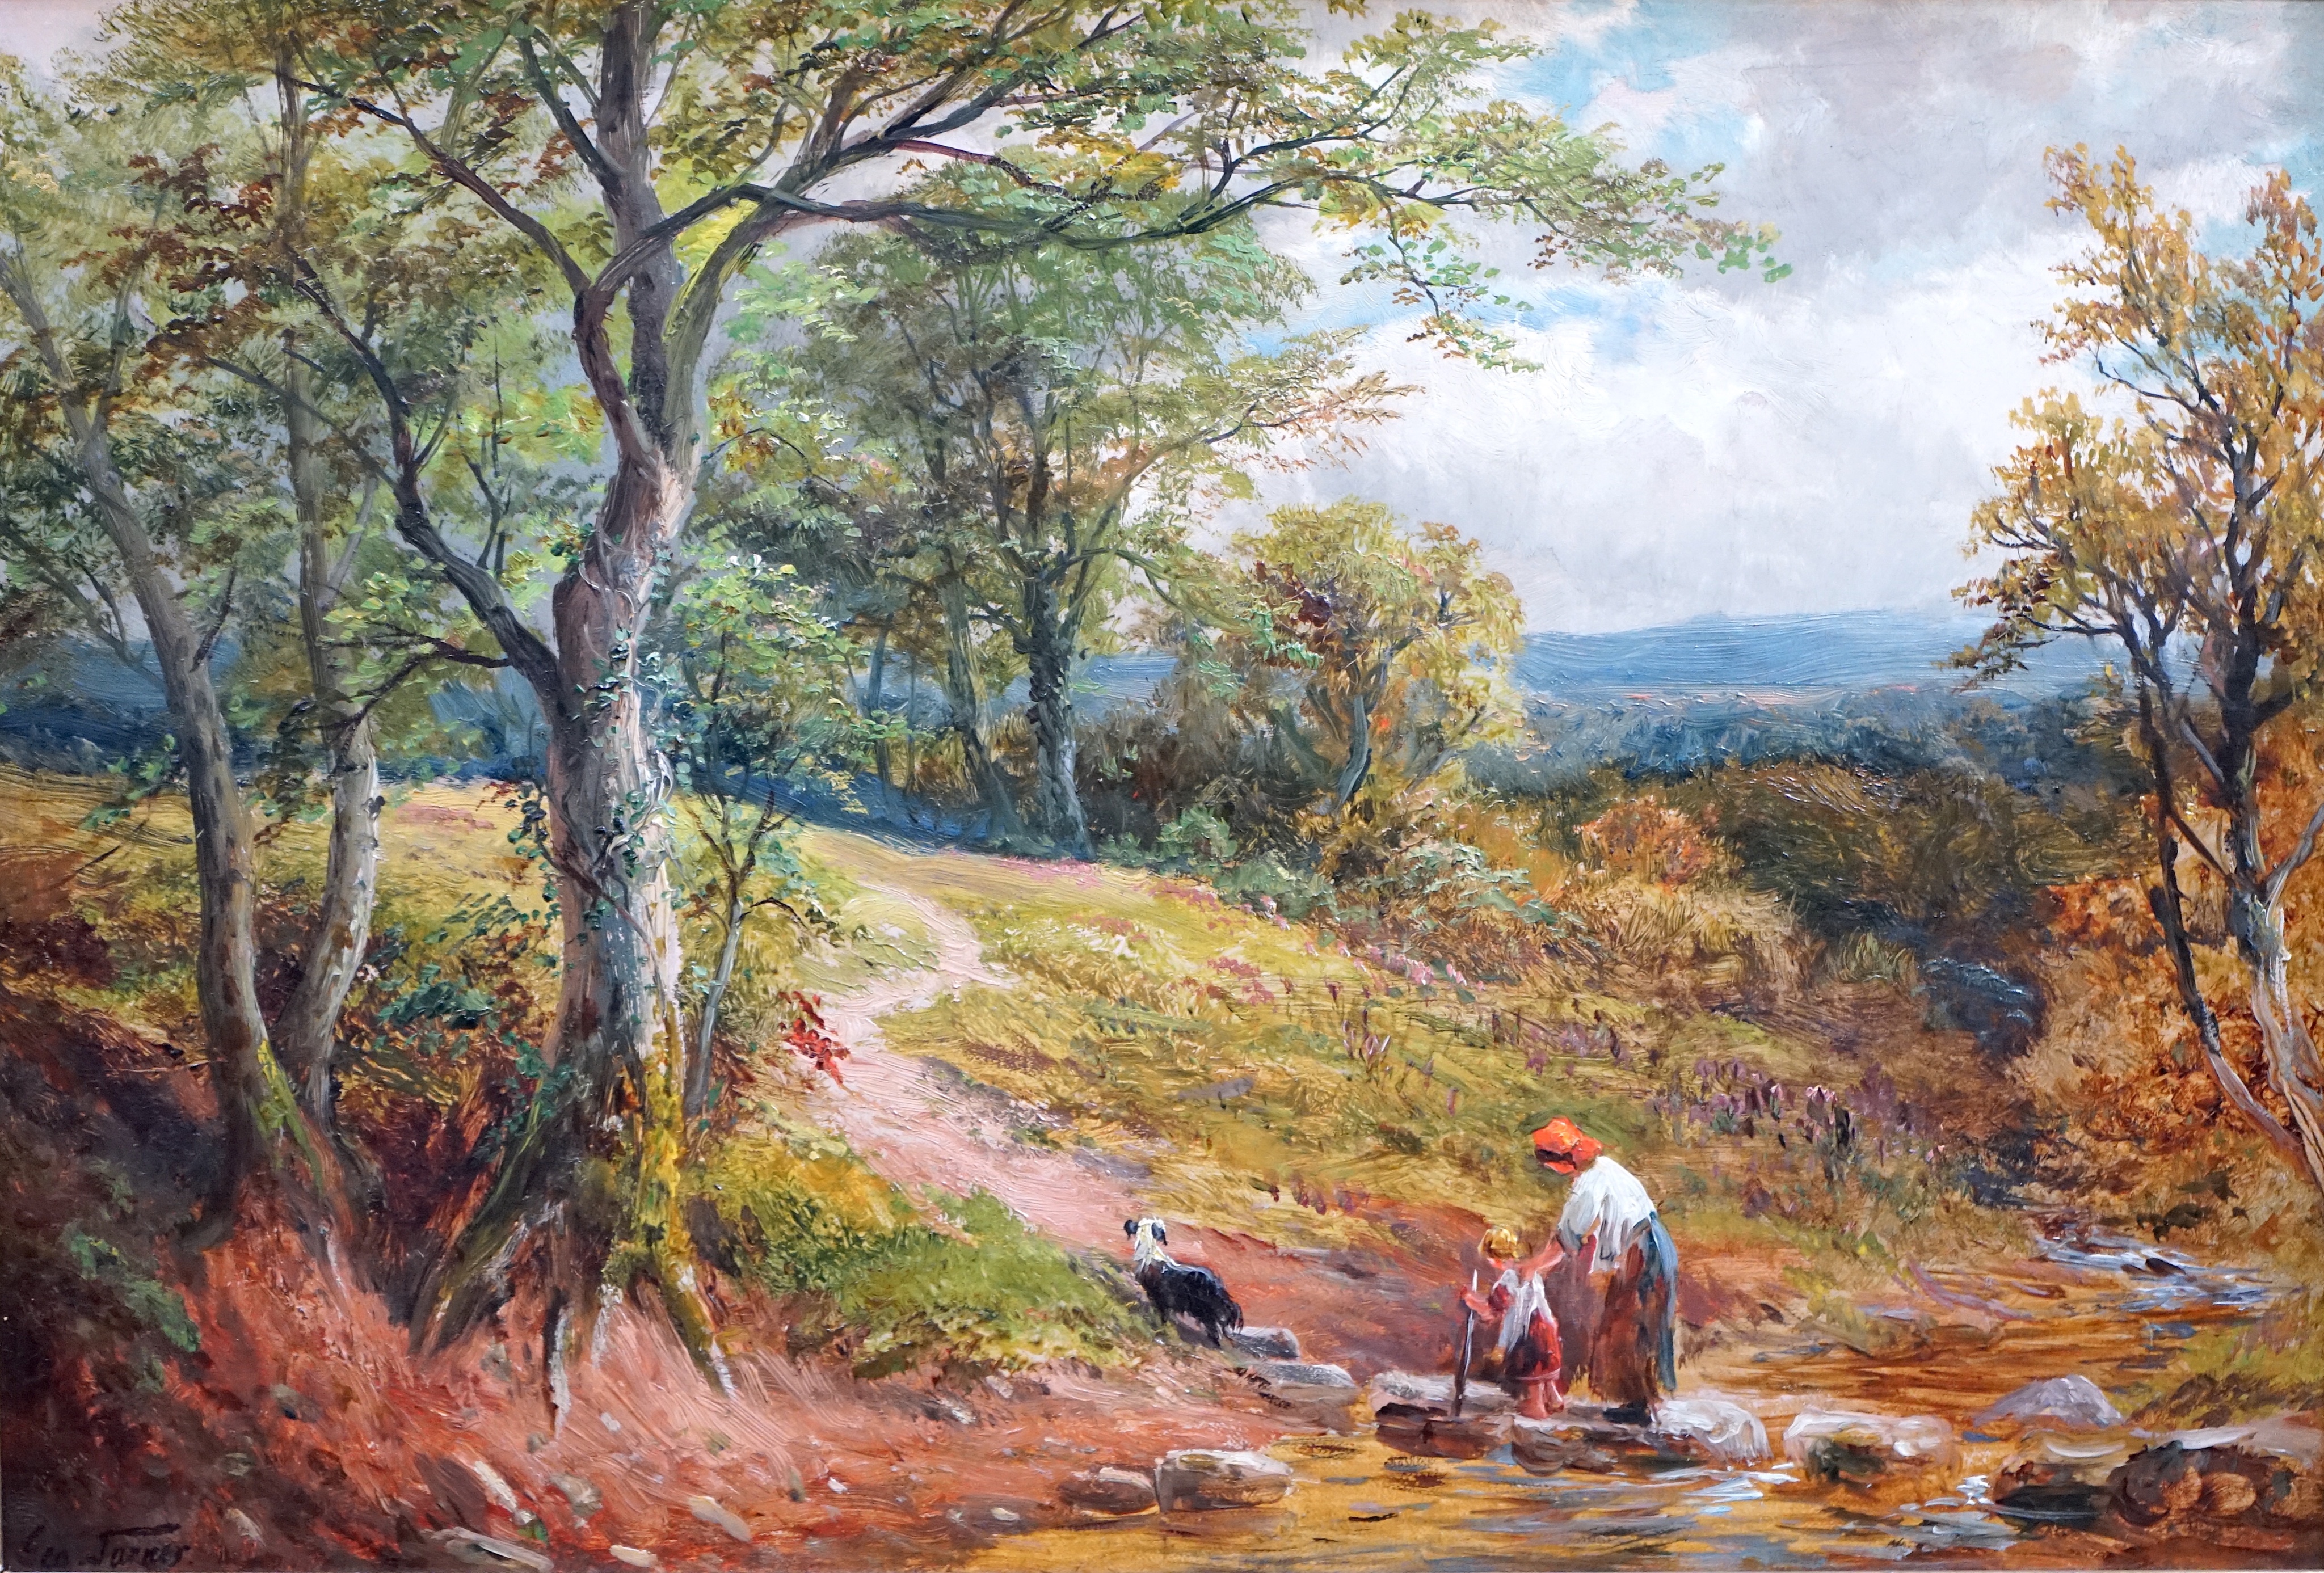 George Turner (1843-1910), 'The Nearest Way Home', oil on canvas, 34 x 50cm